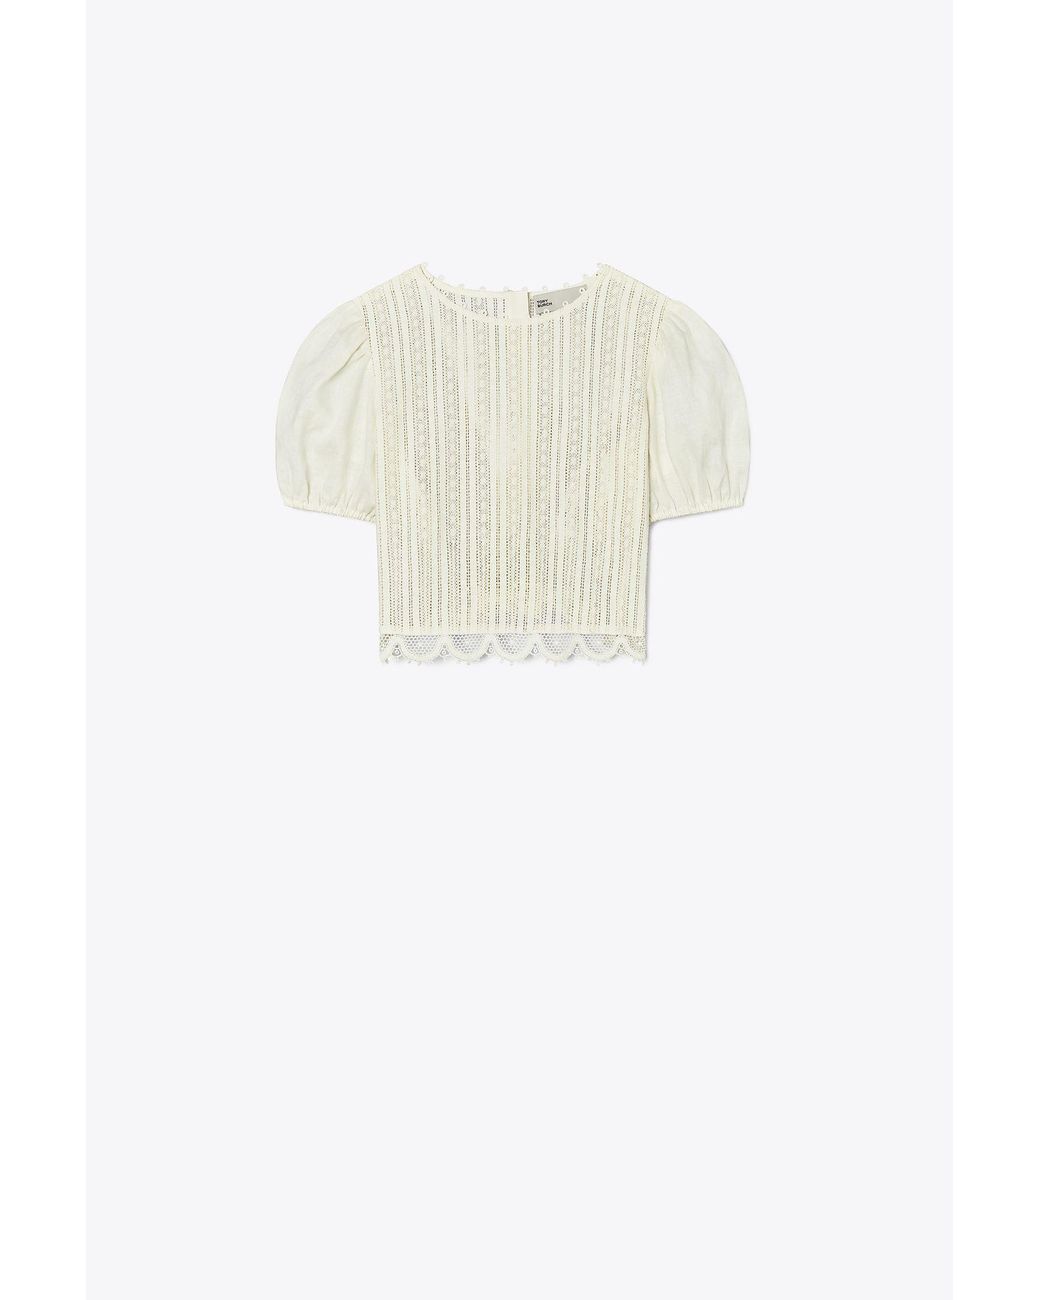 Tory Burch Lace Crop Top in White | Lyst